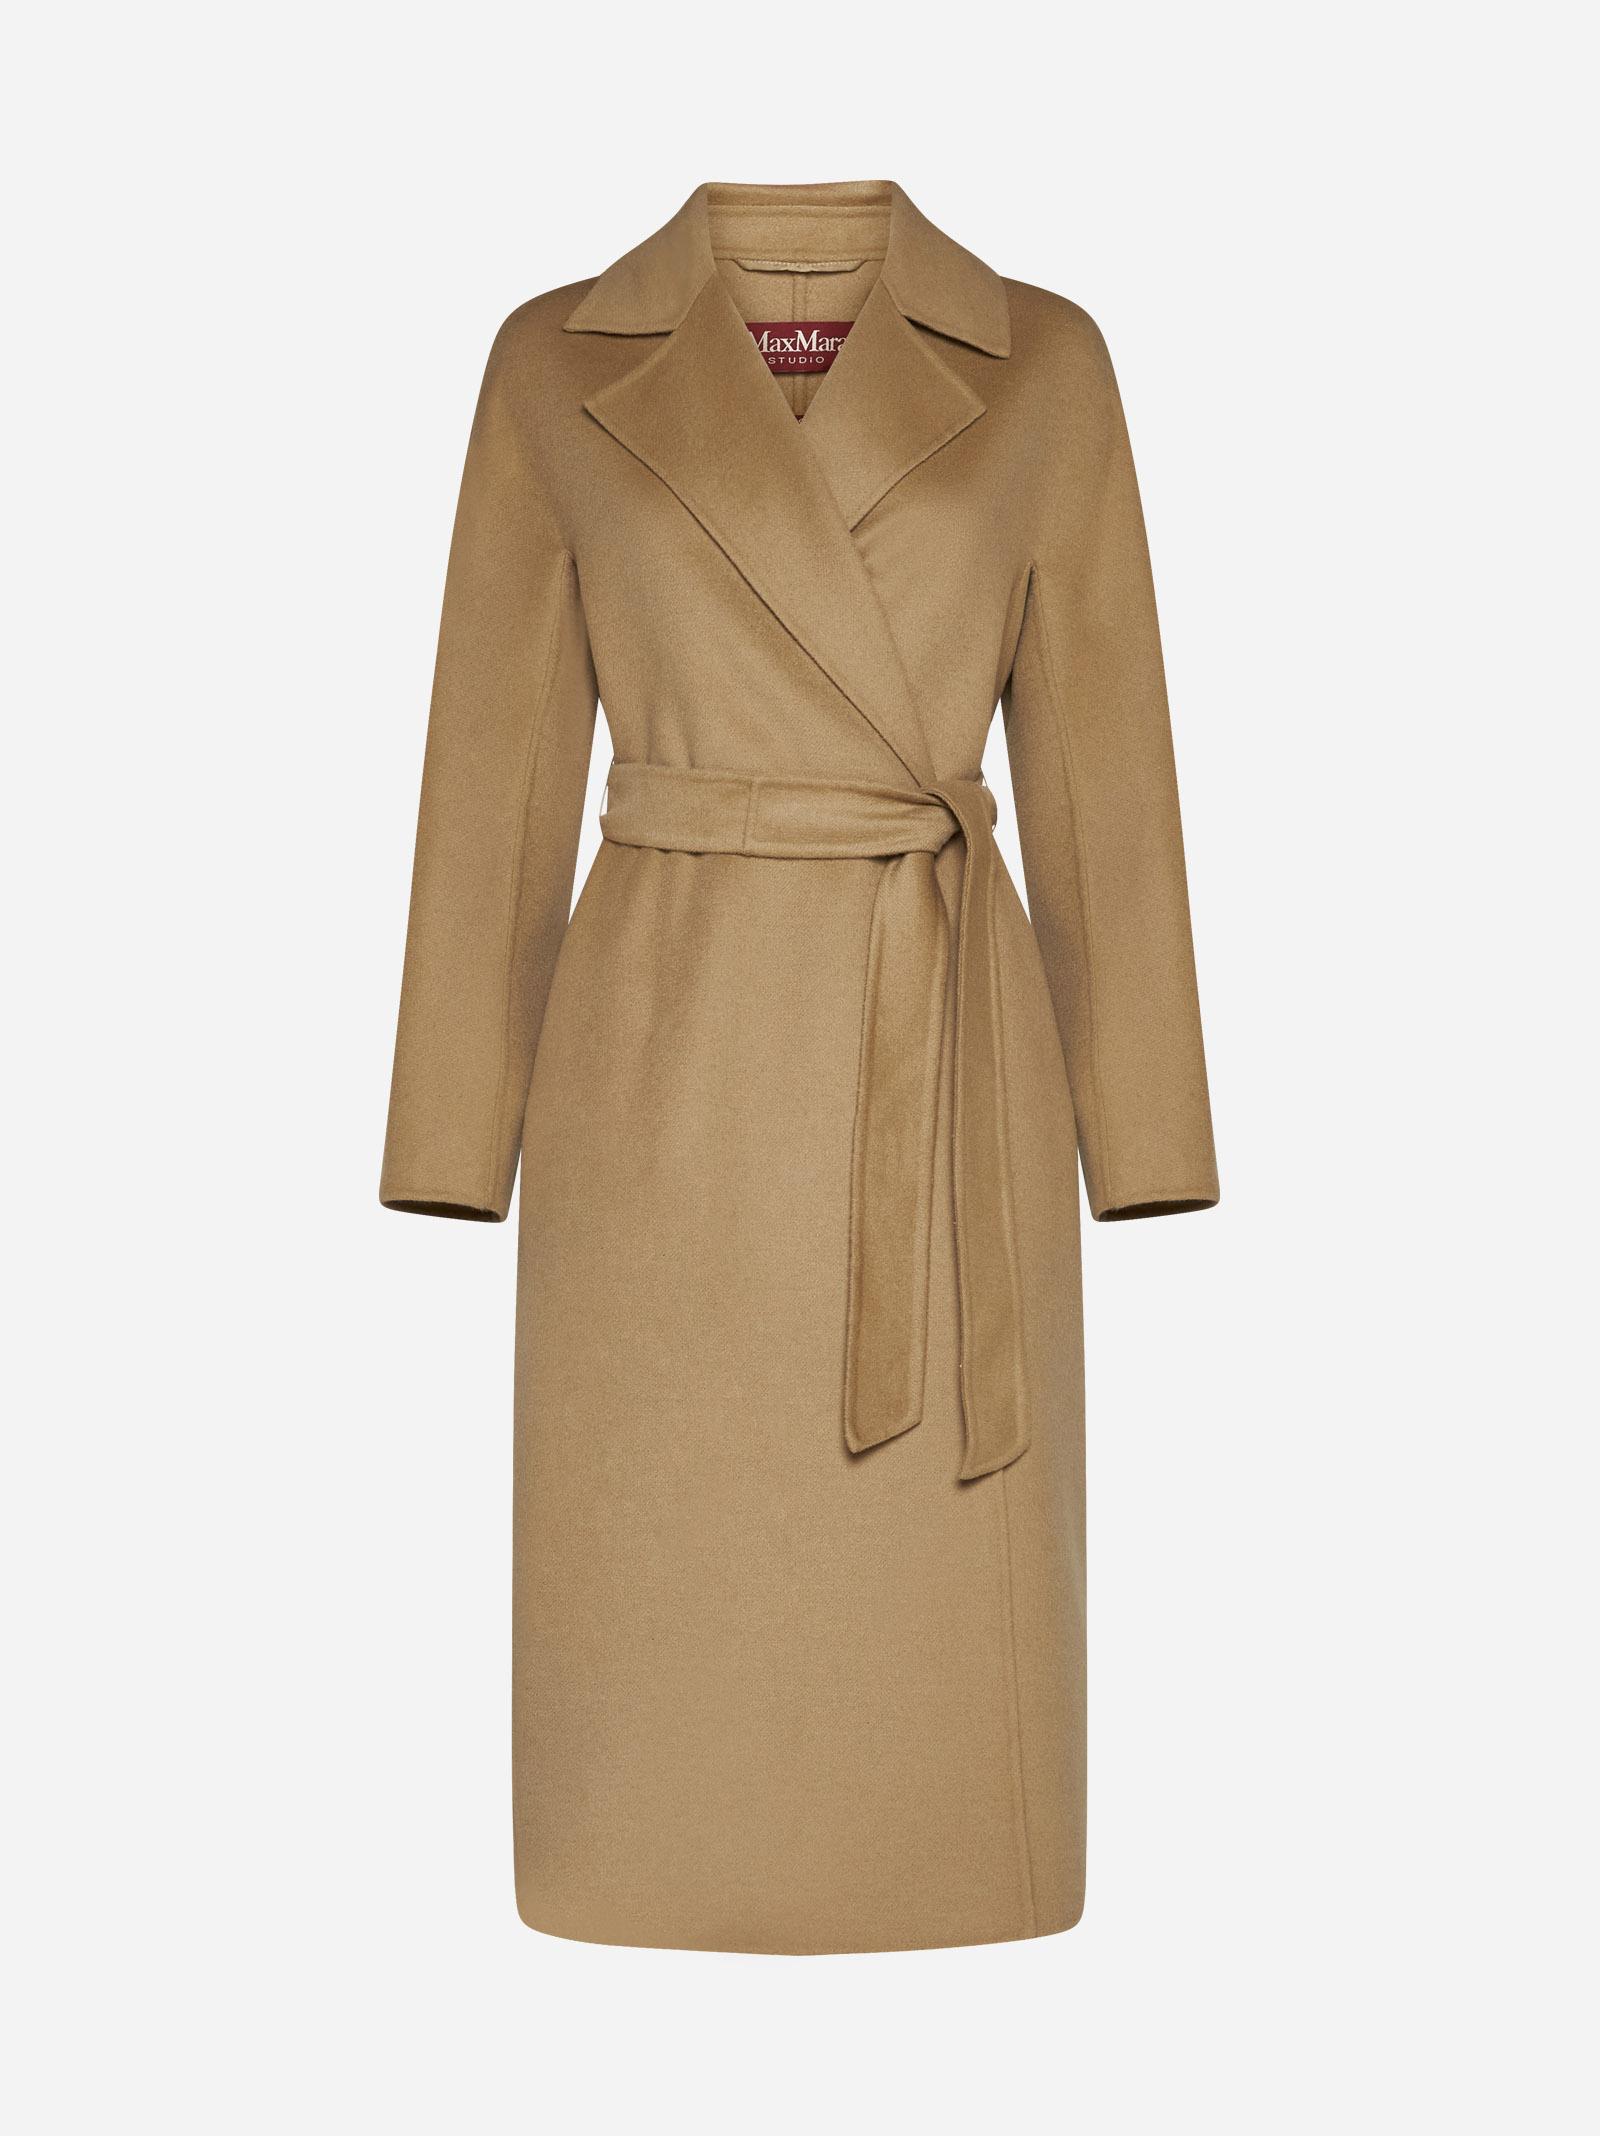 Max Mara Studio Cles Wool-blend Belted Coat in Natural | Lyst